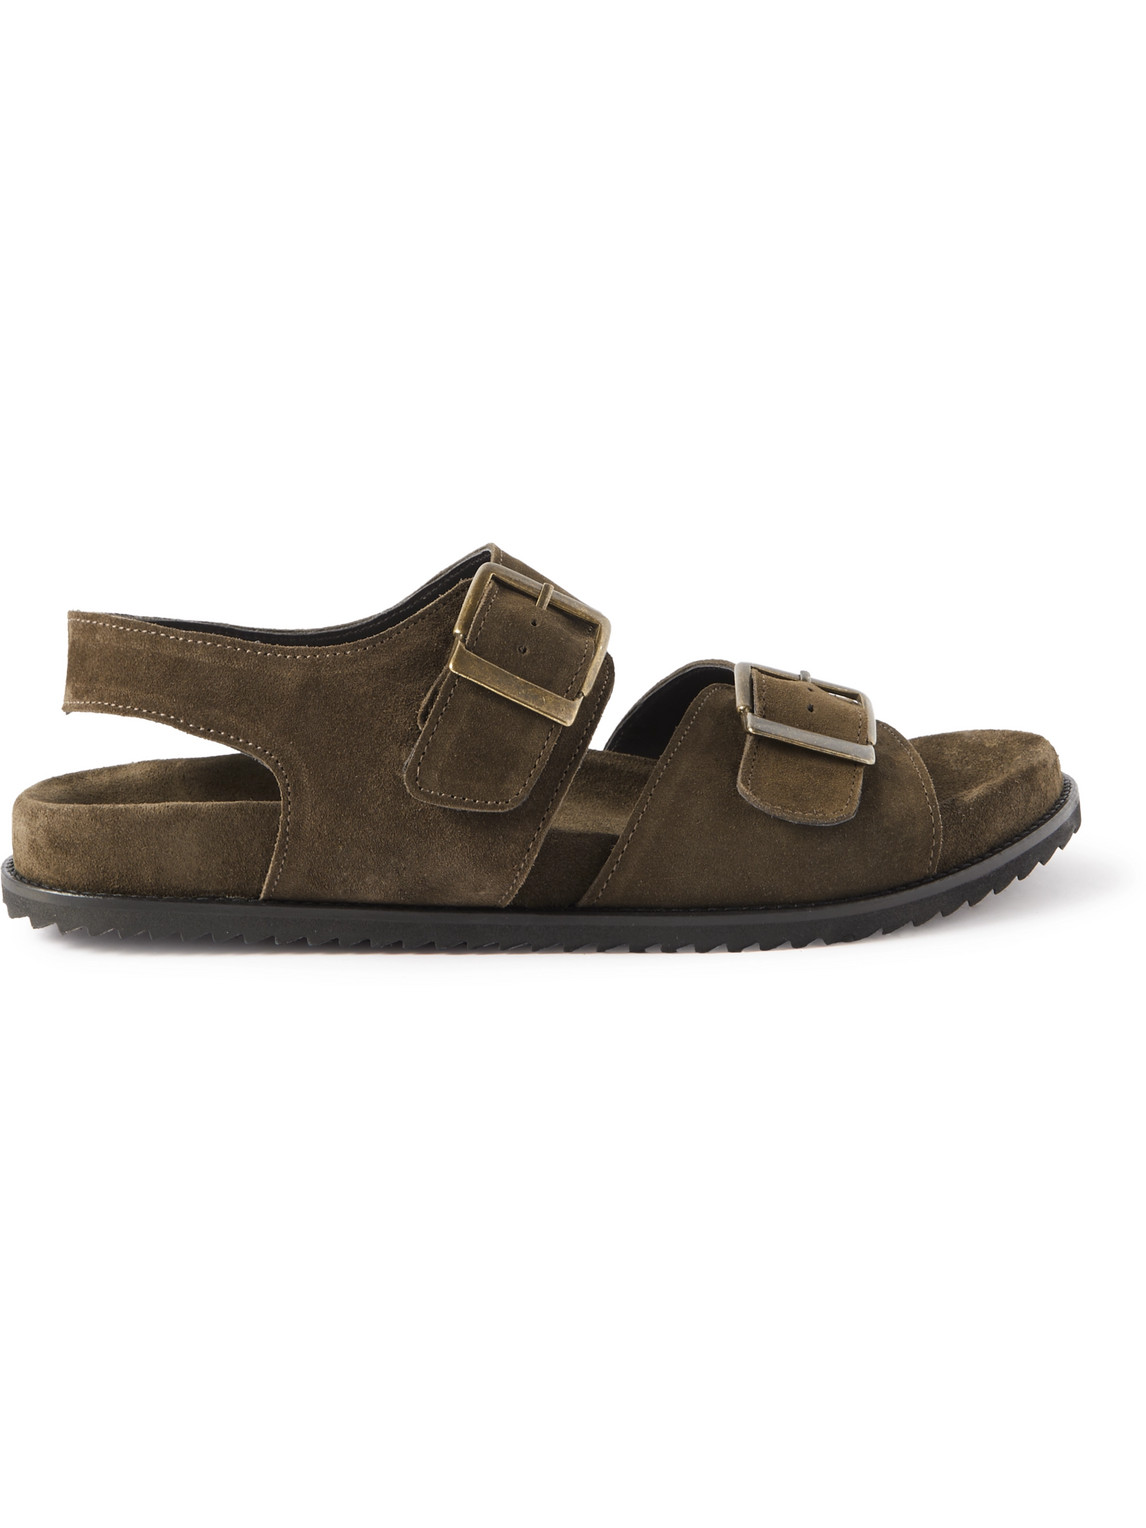 Mr P. David Buckled Regenerated Suede By Evolo® Sandals In Brown